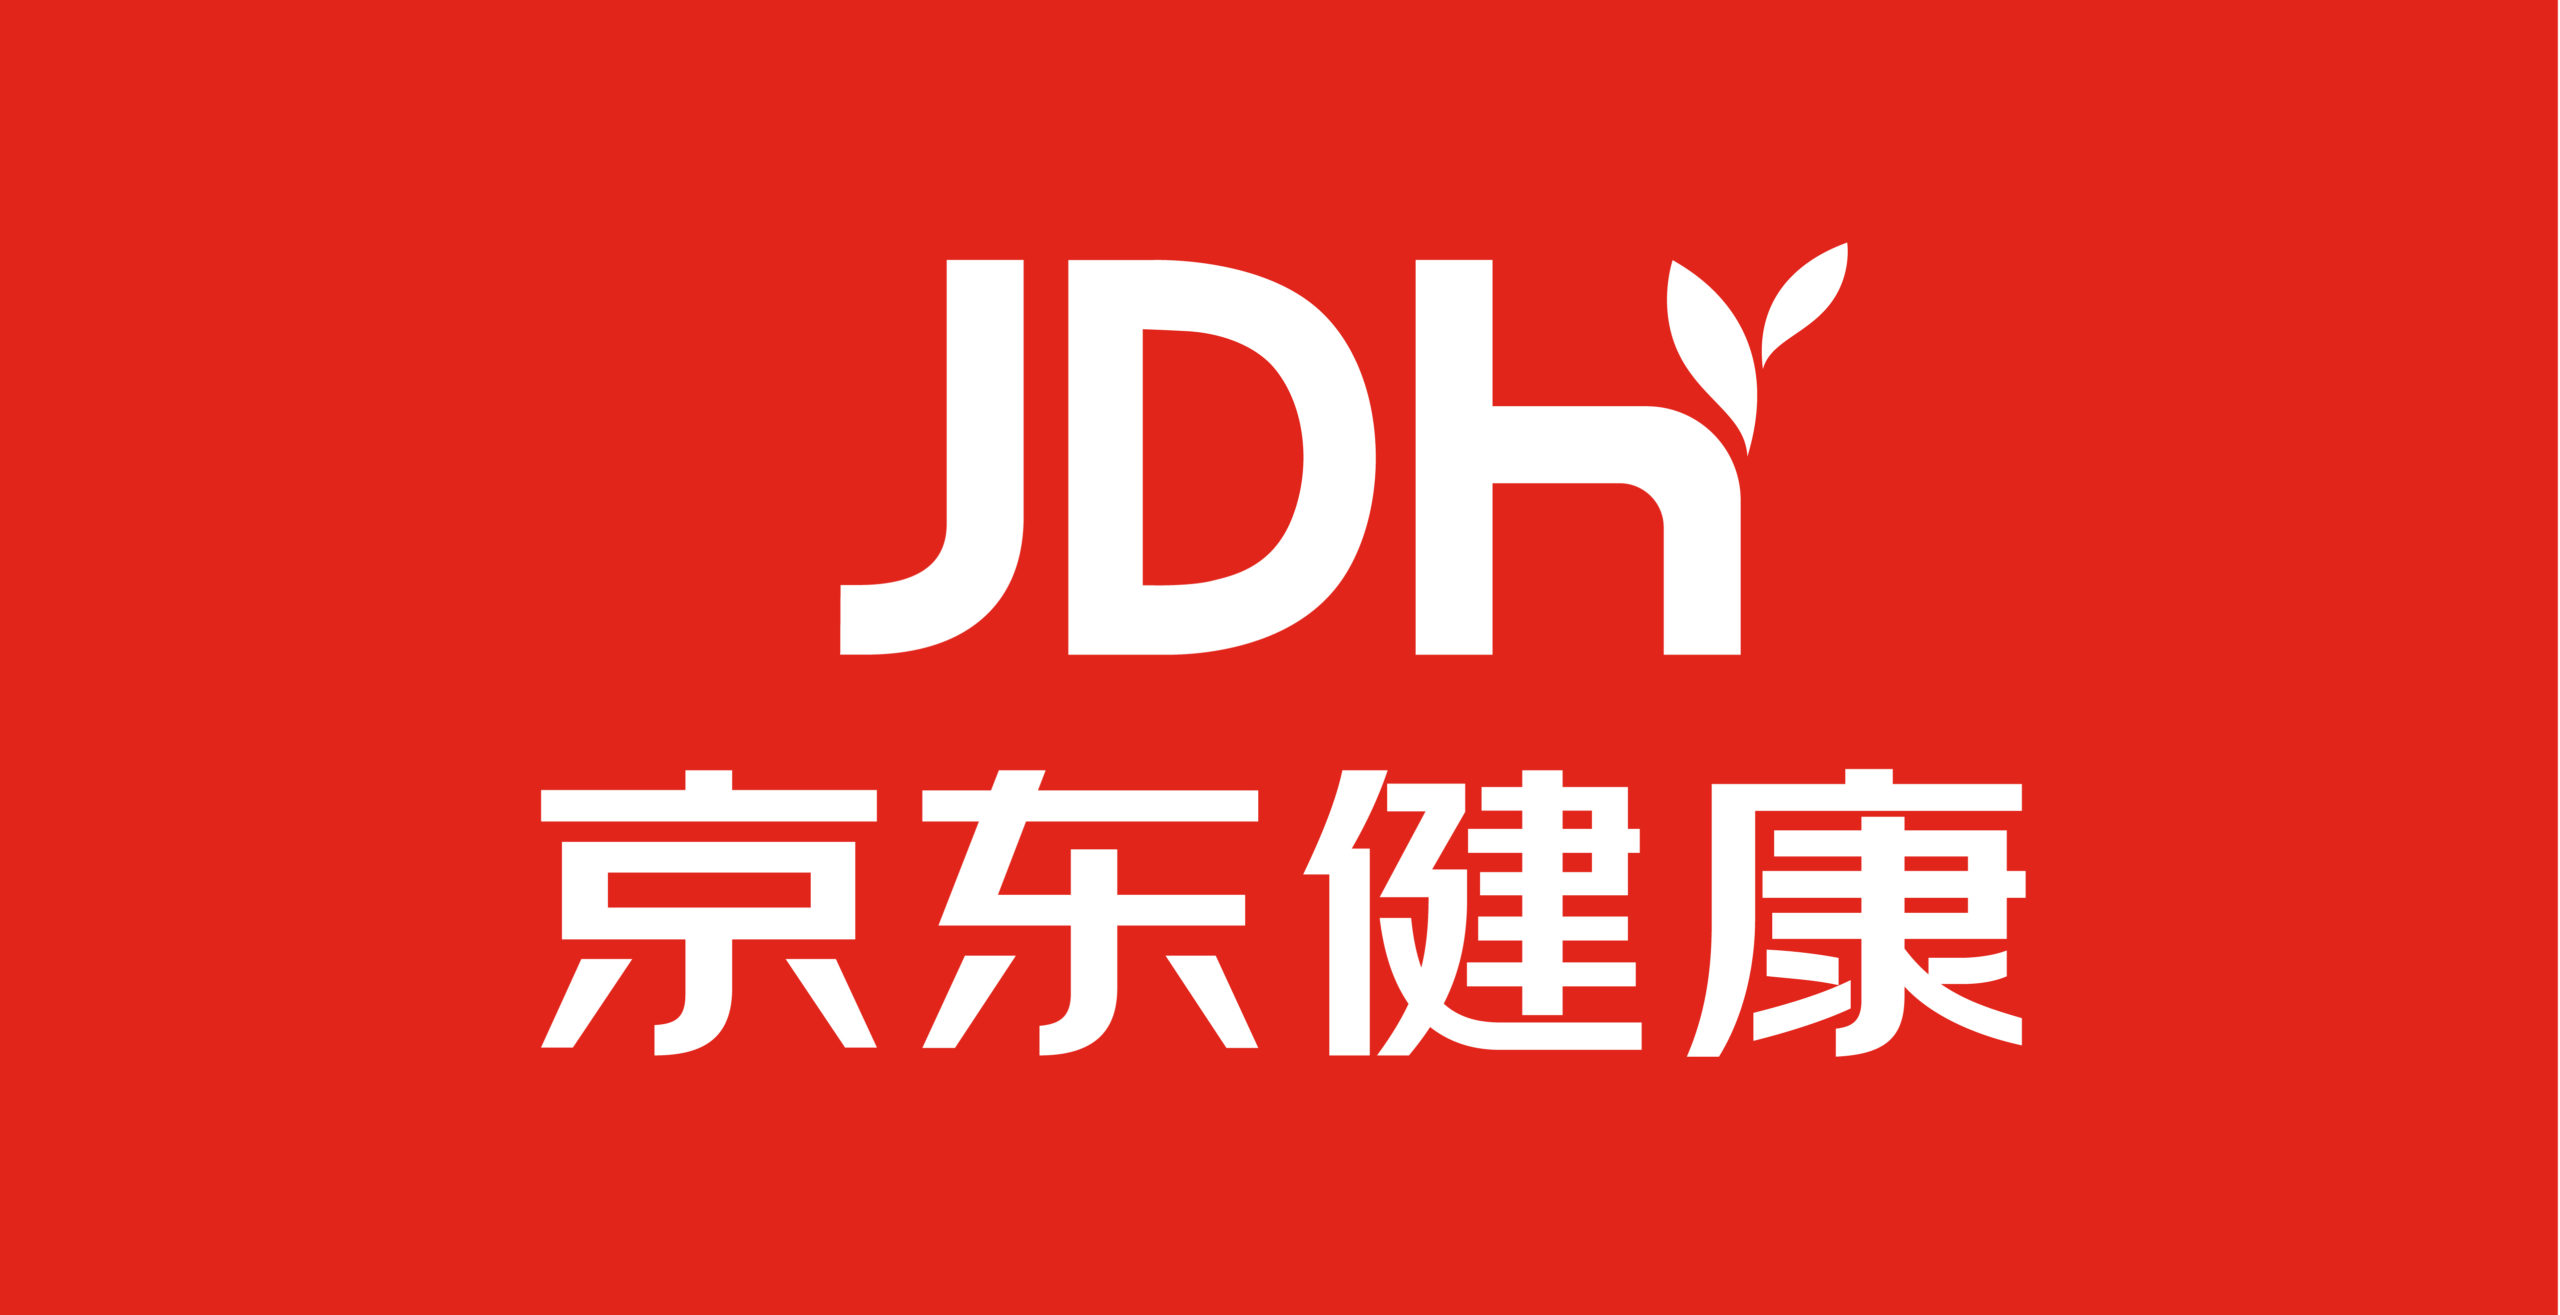 JD Health Releases 2021 Annual Results